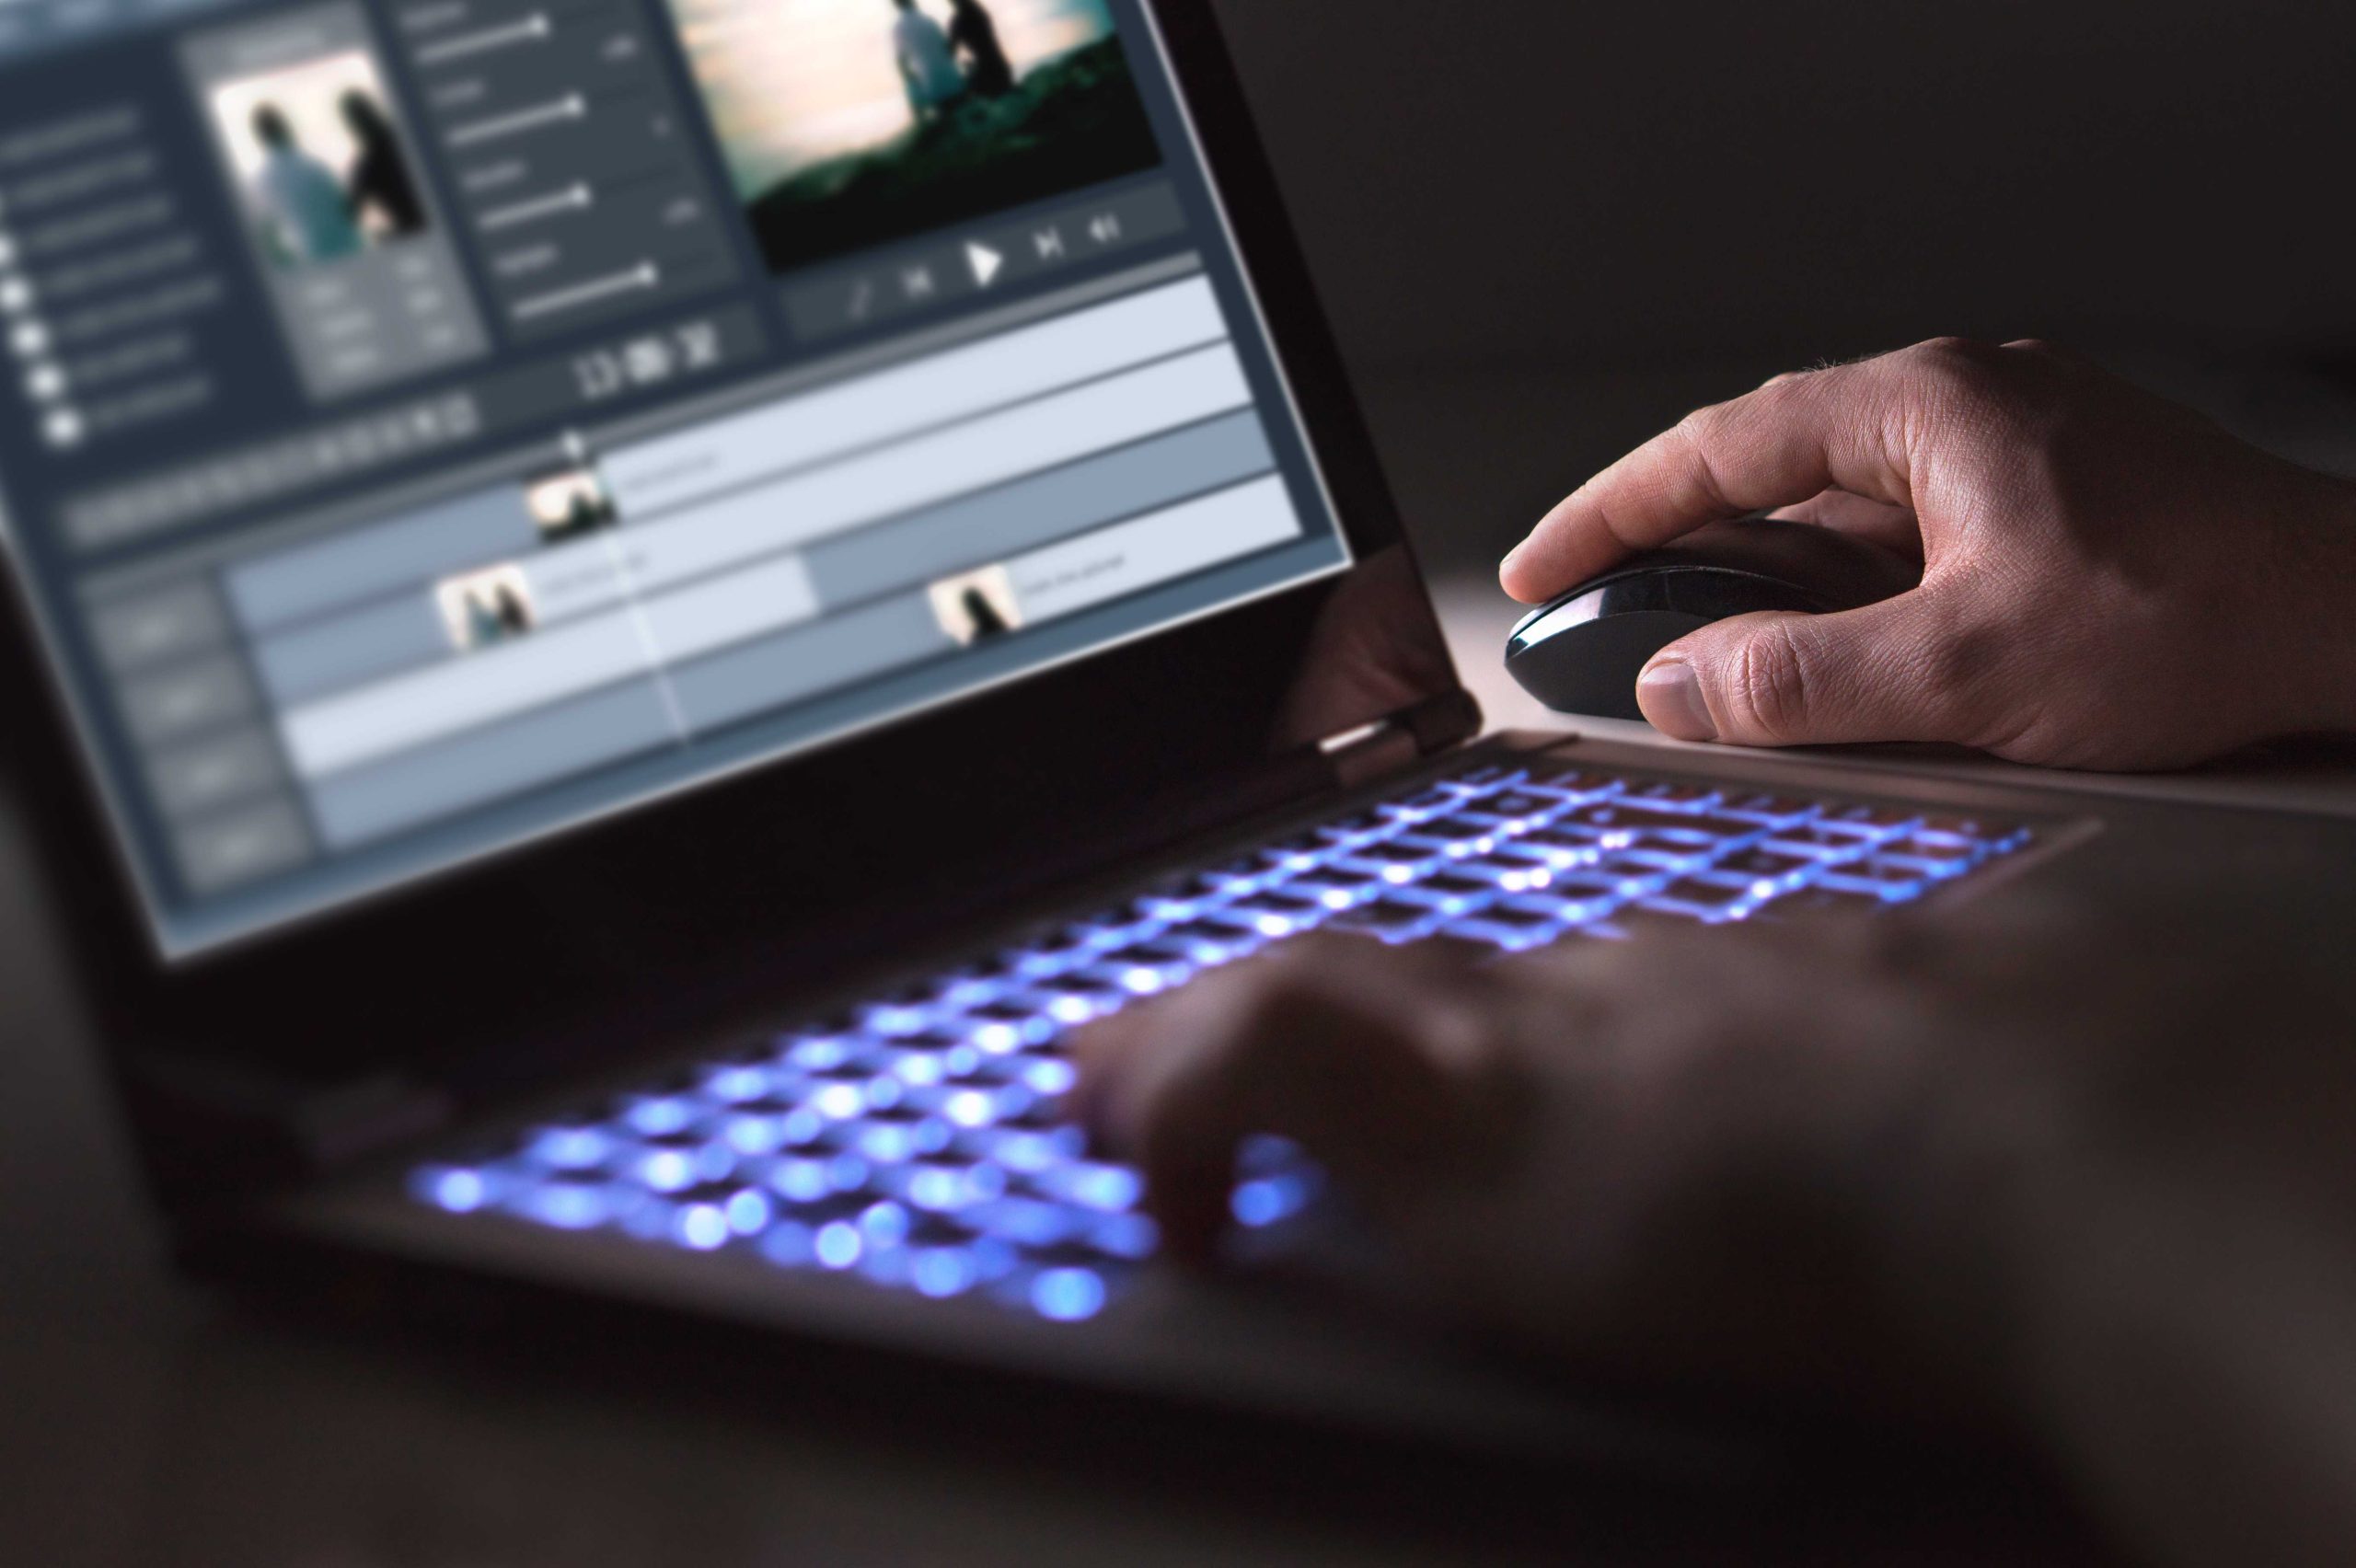 Basic steps to better video editing